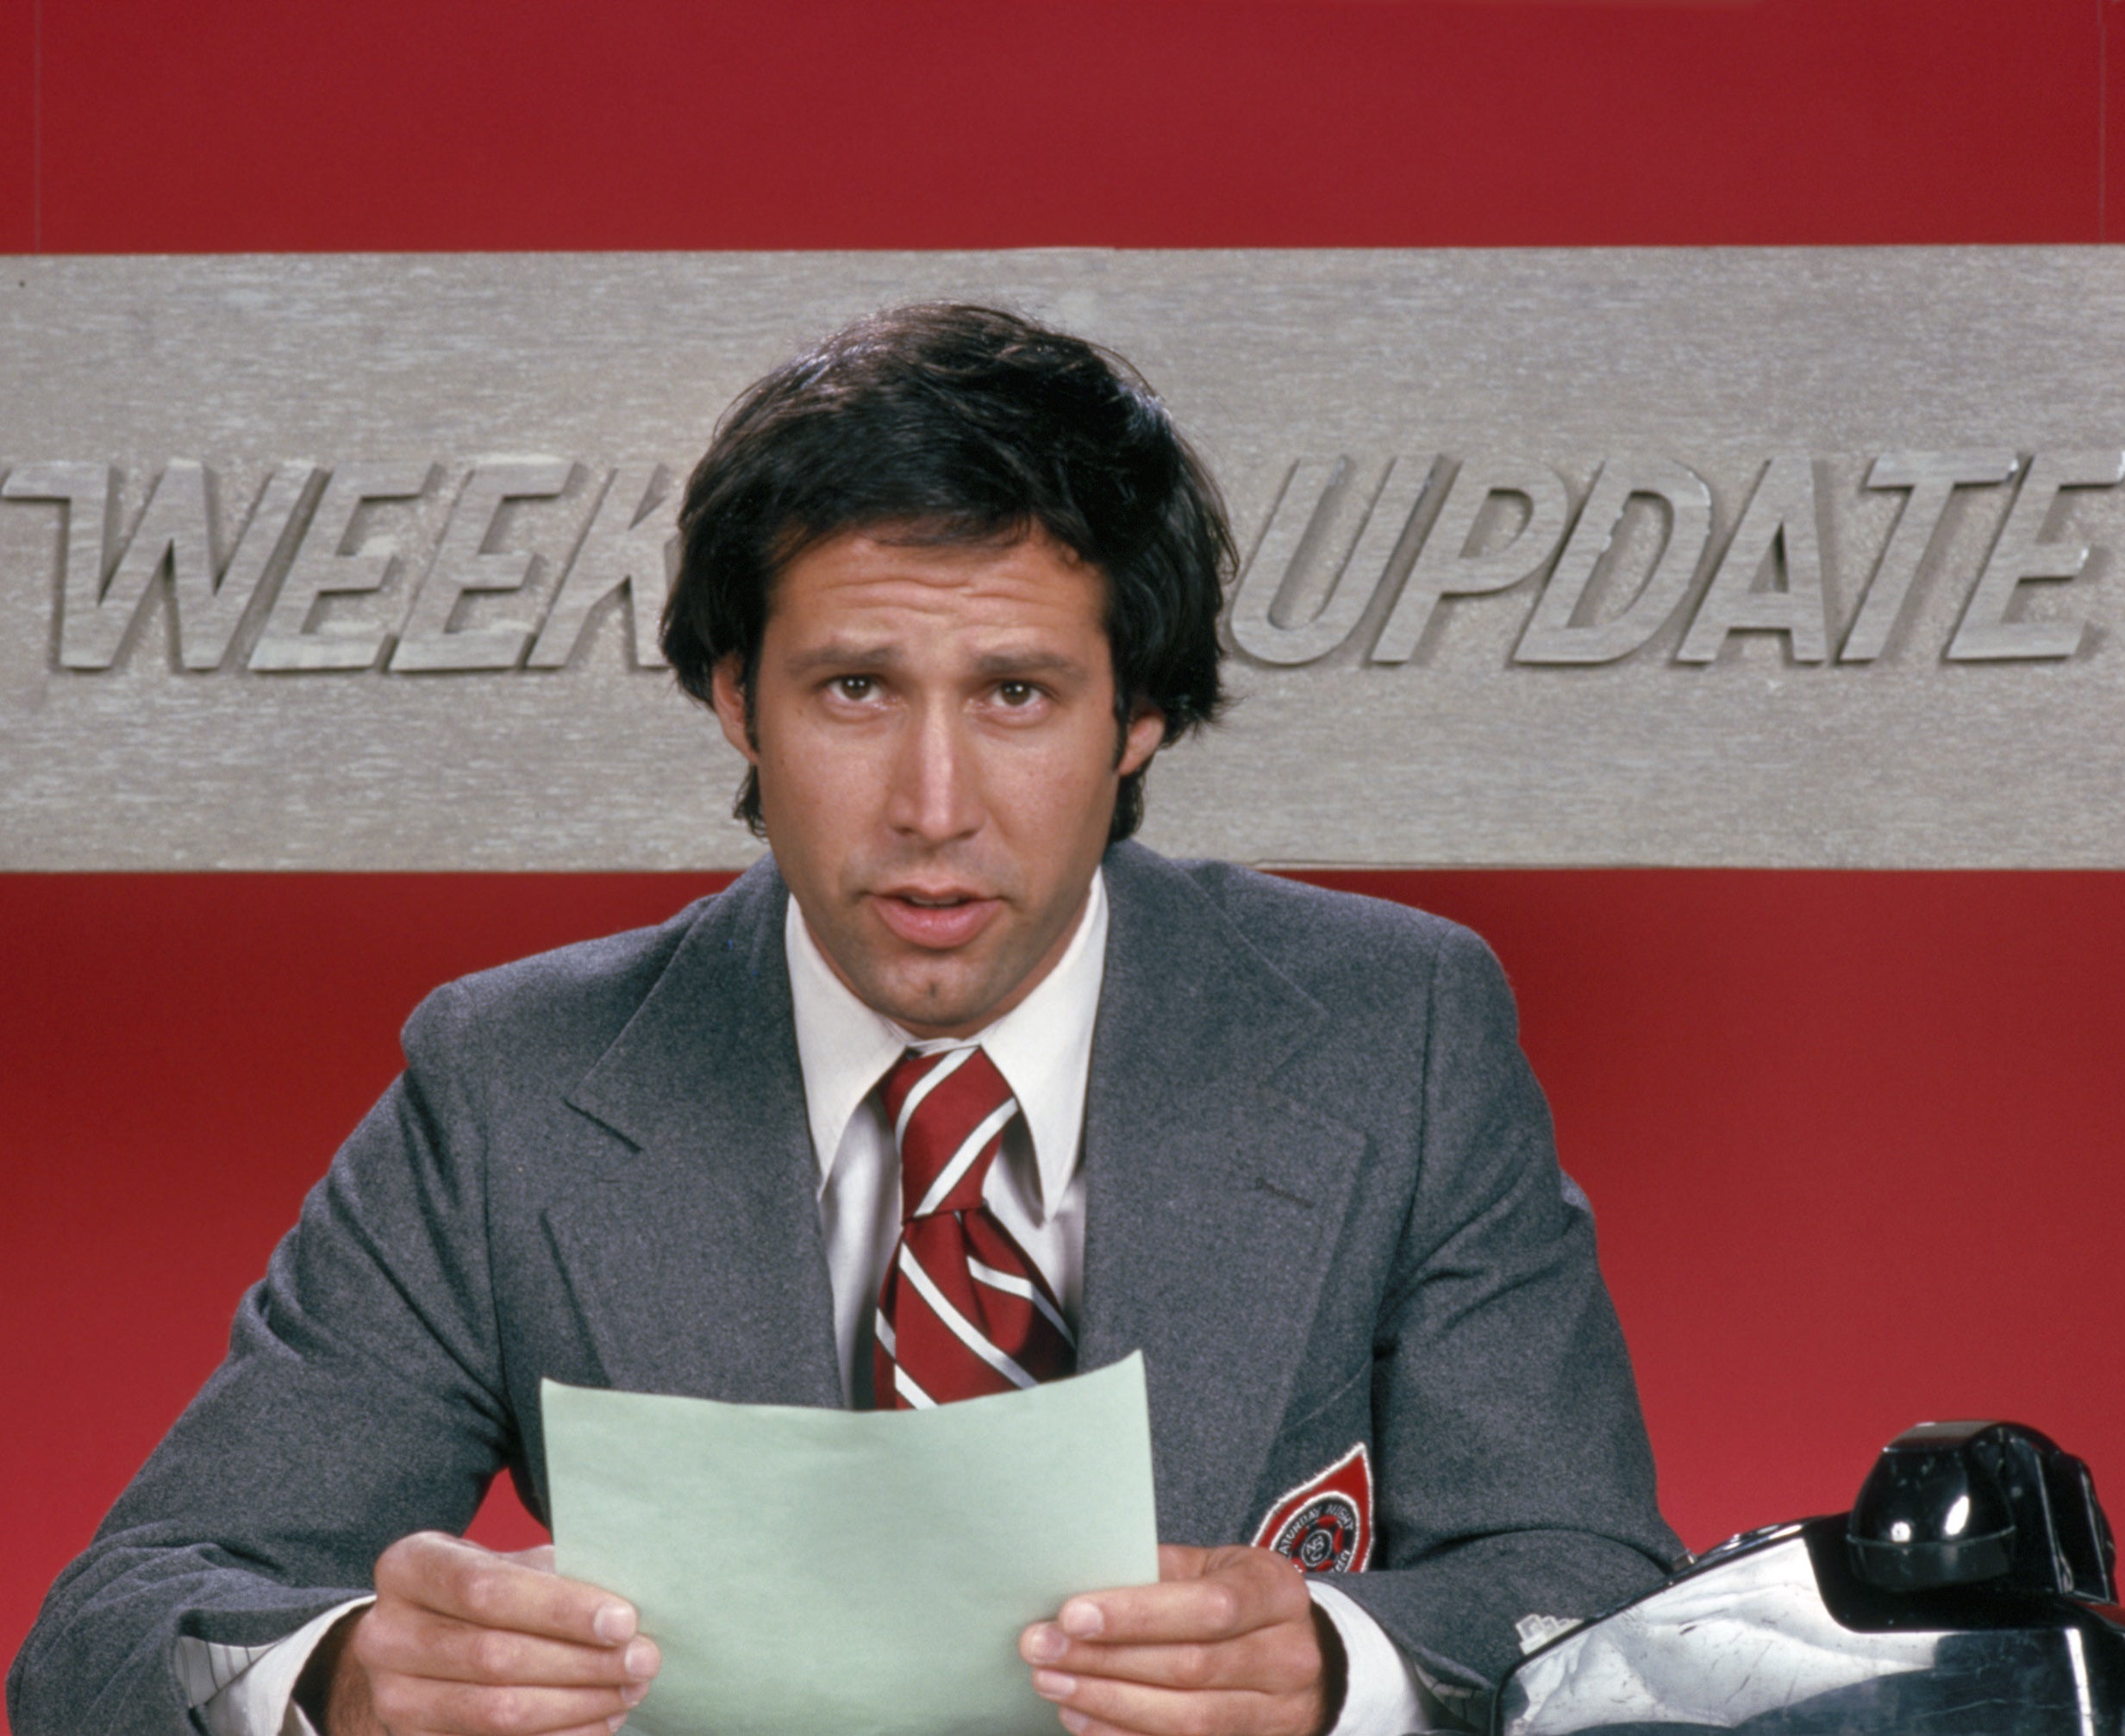 Chevy Chase during &quot;Weekend Update&quot;